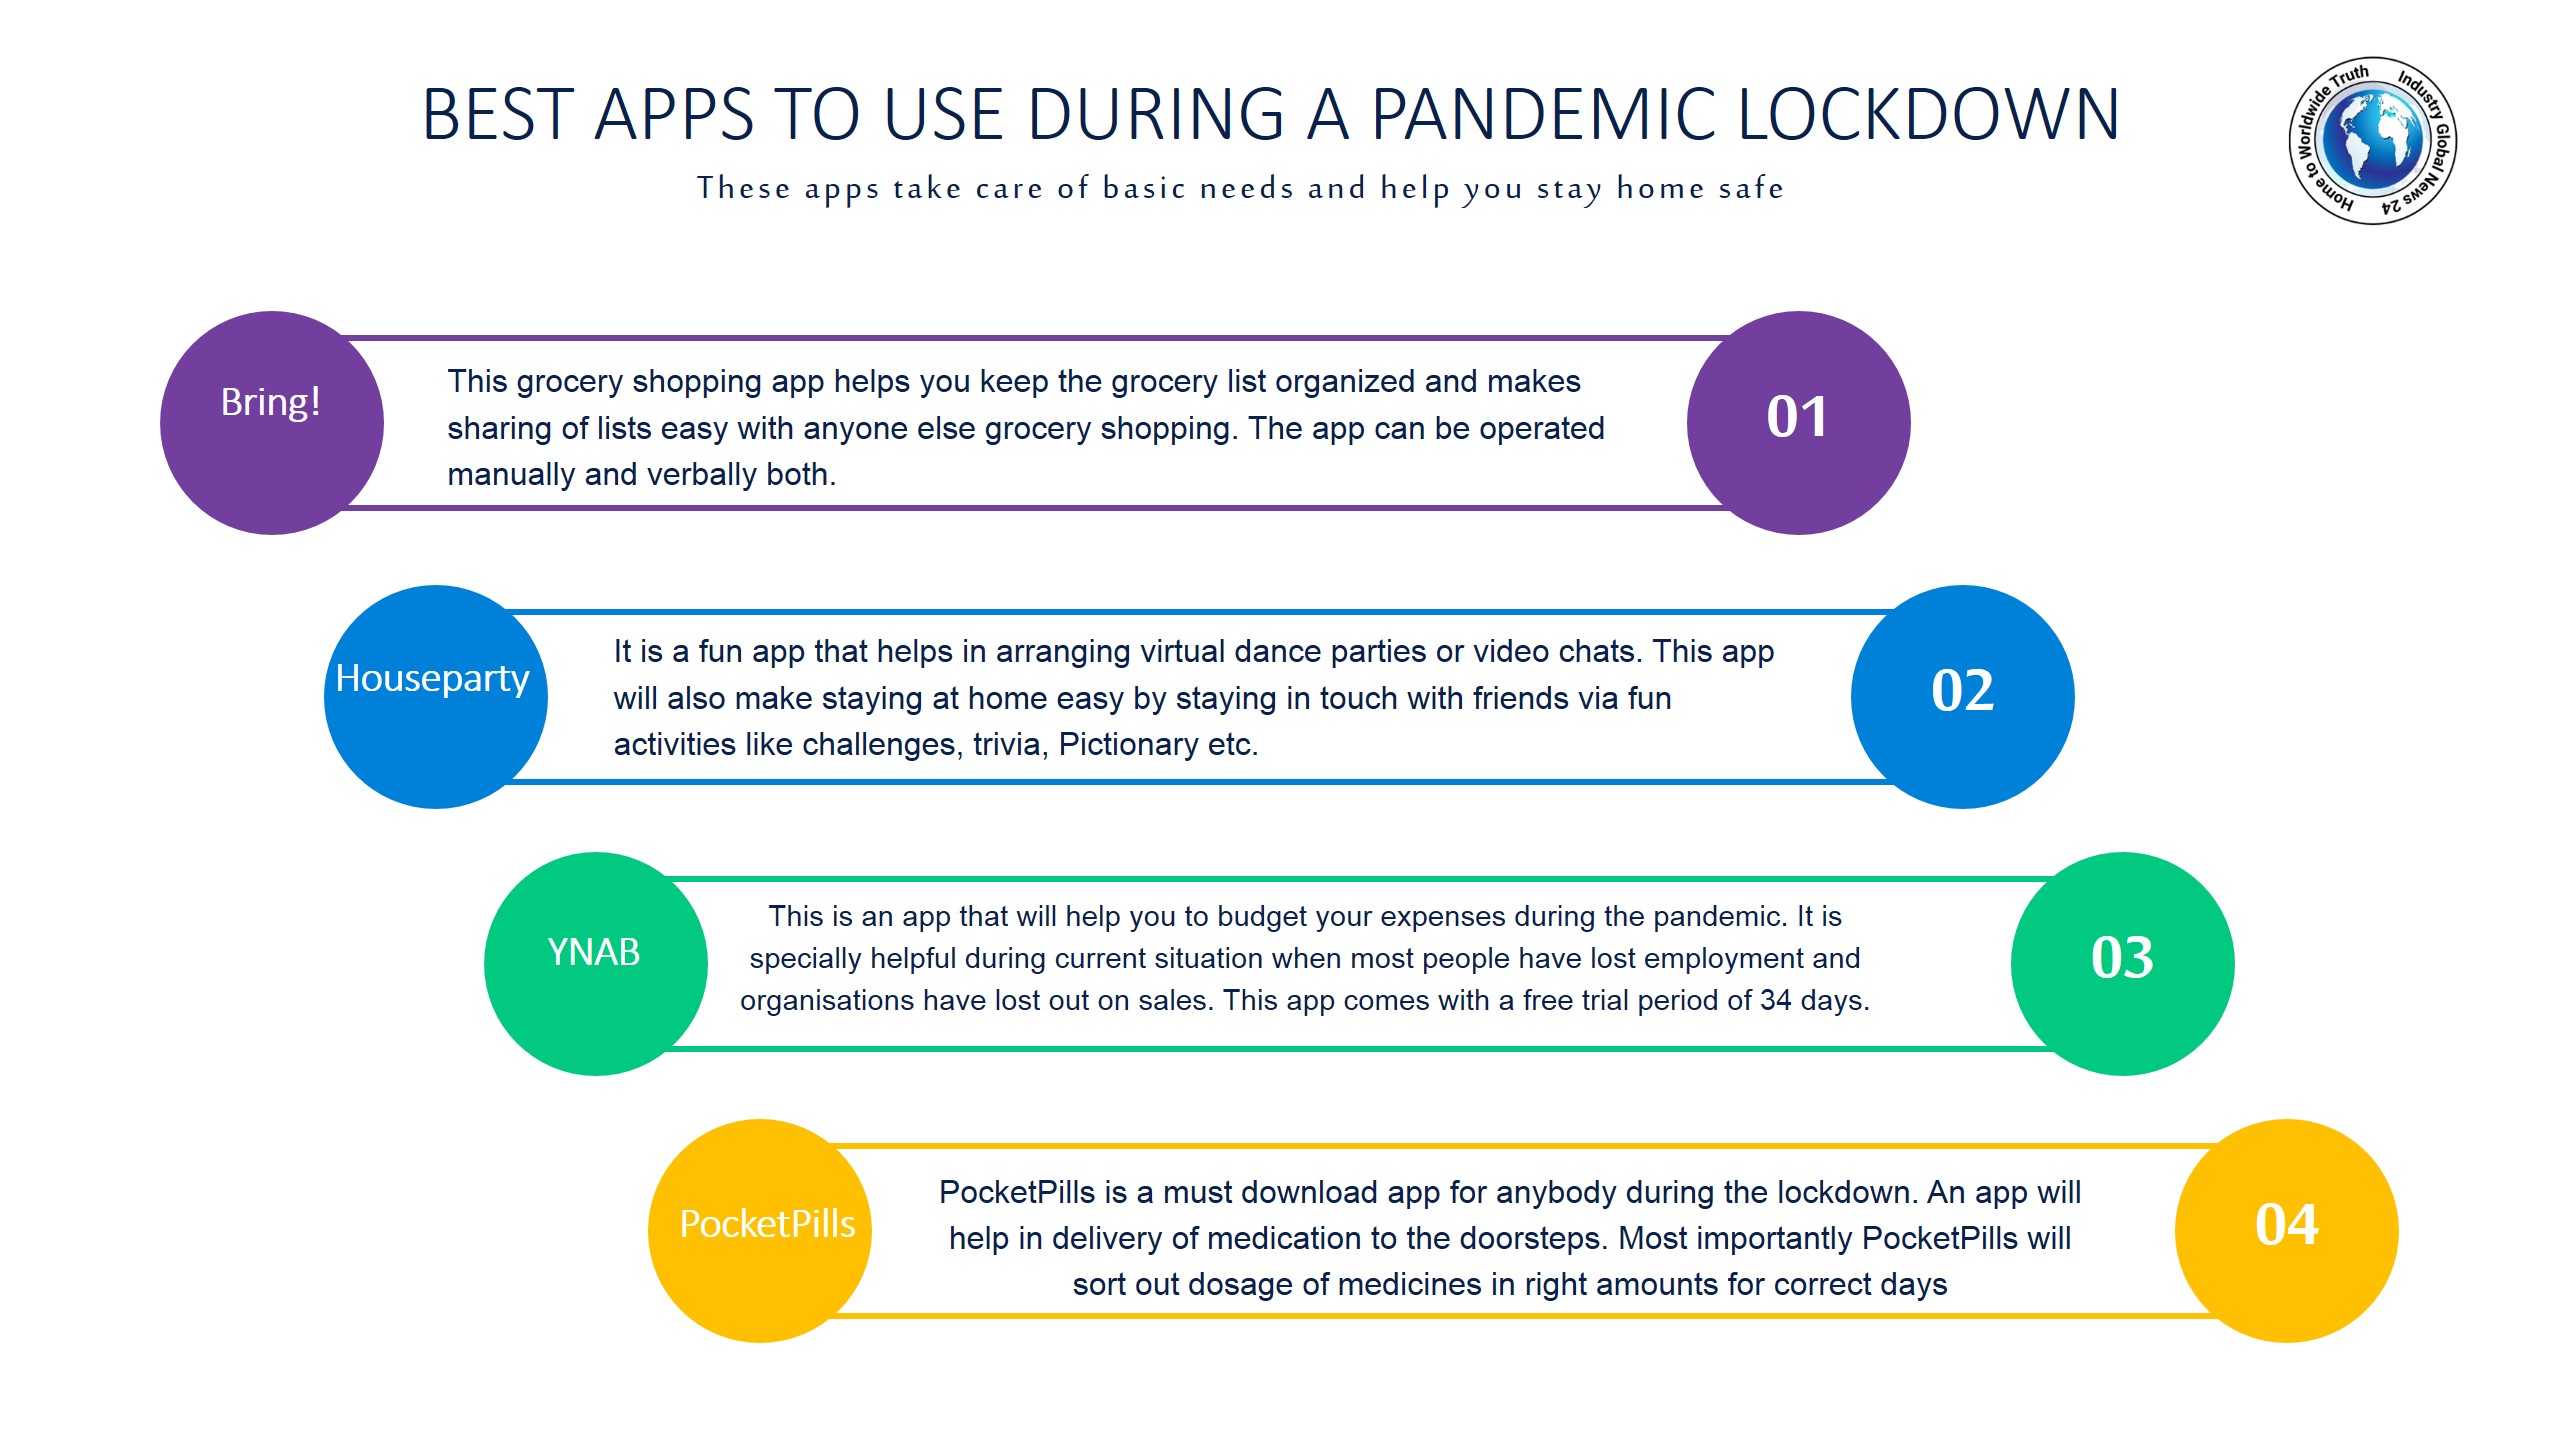 Best apps to use during a pandemic lockdown